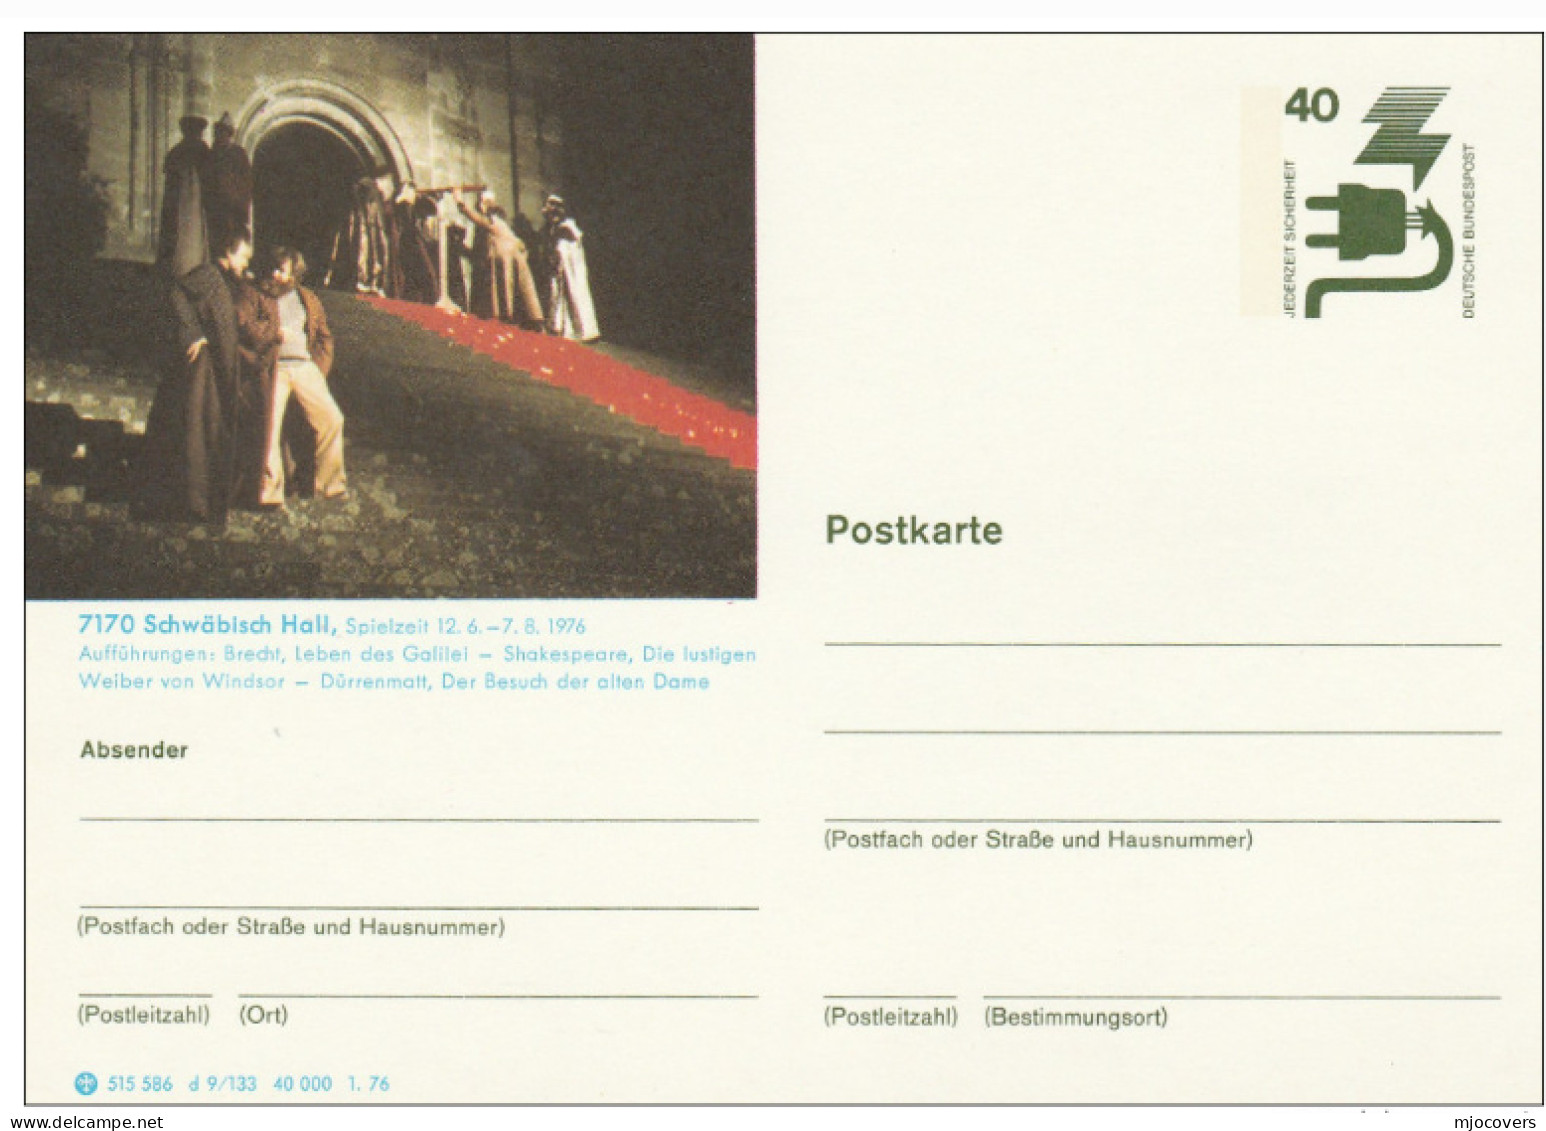 SHAKESPEARE At SCHWABISCH HALL THEATRE Postal STATIONERY Card 1976 Germany Cover Stamps - Theatre